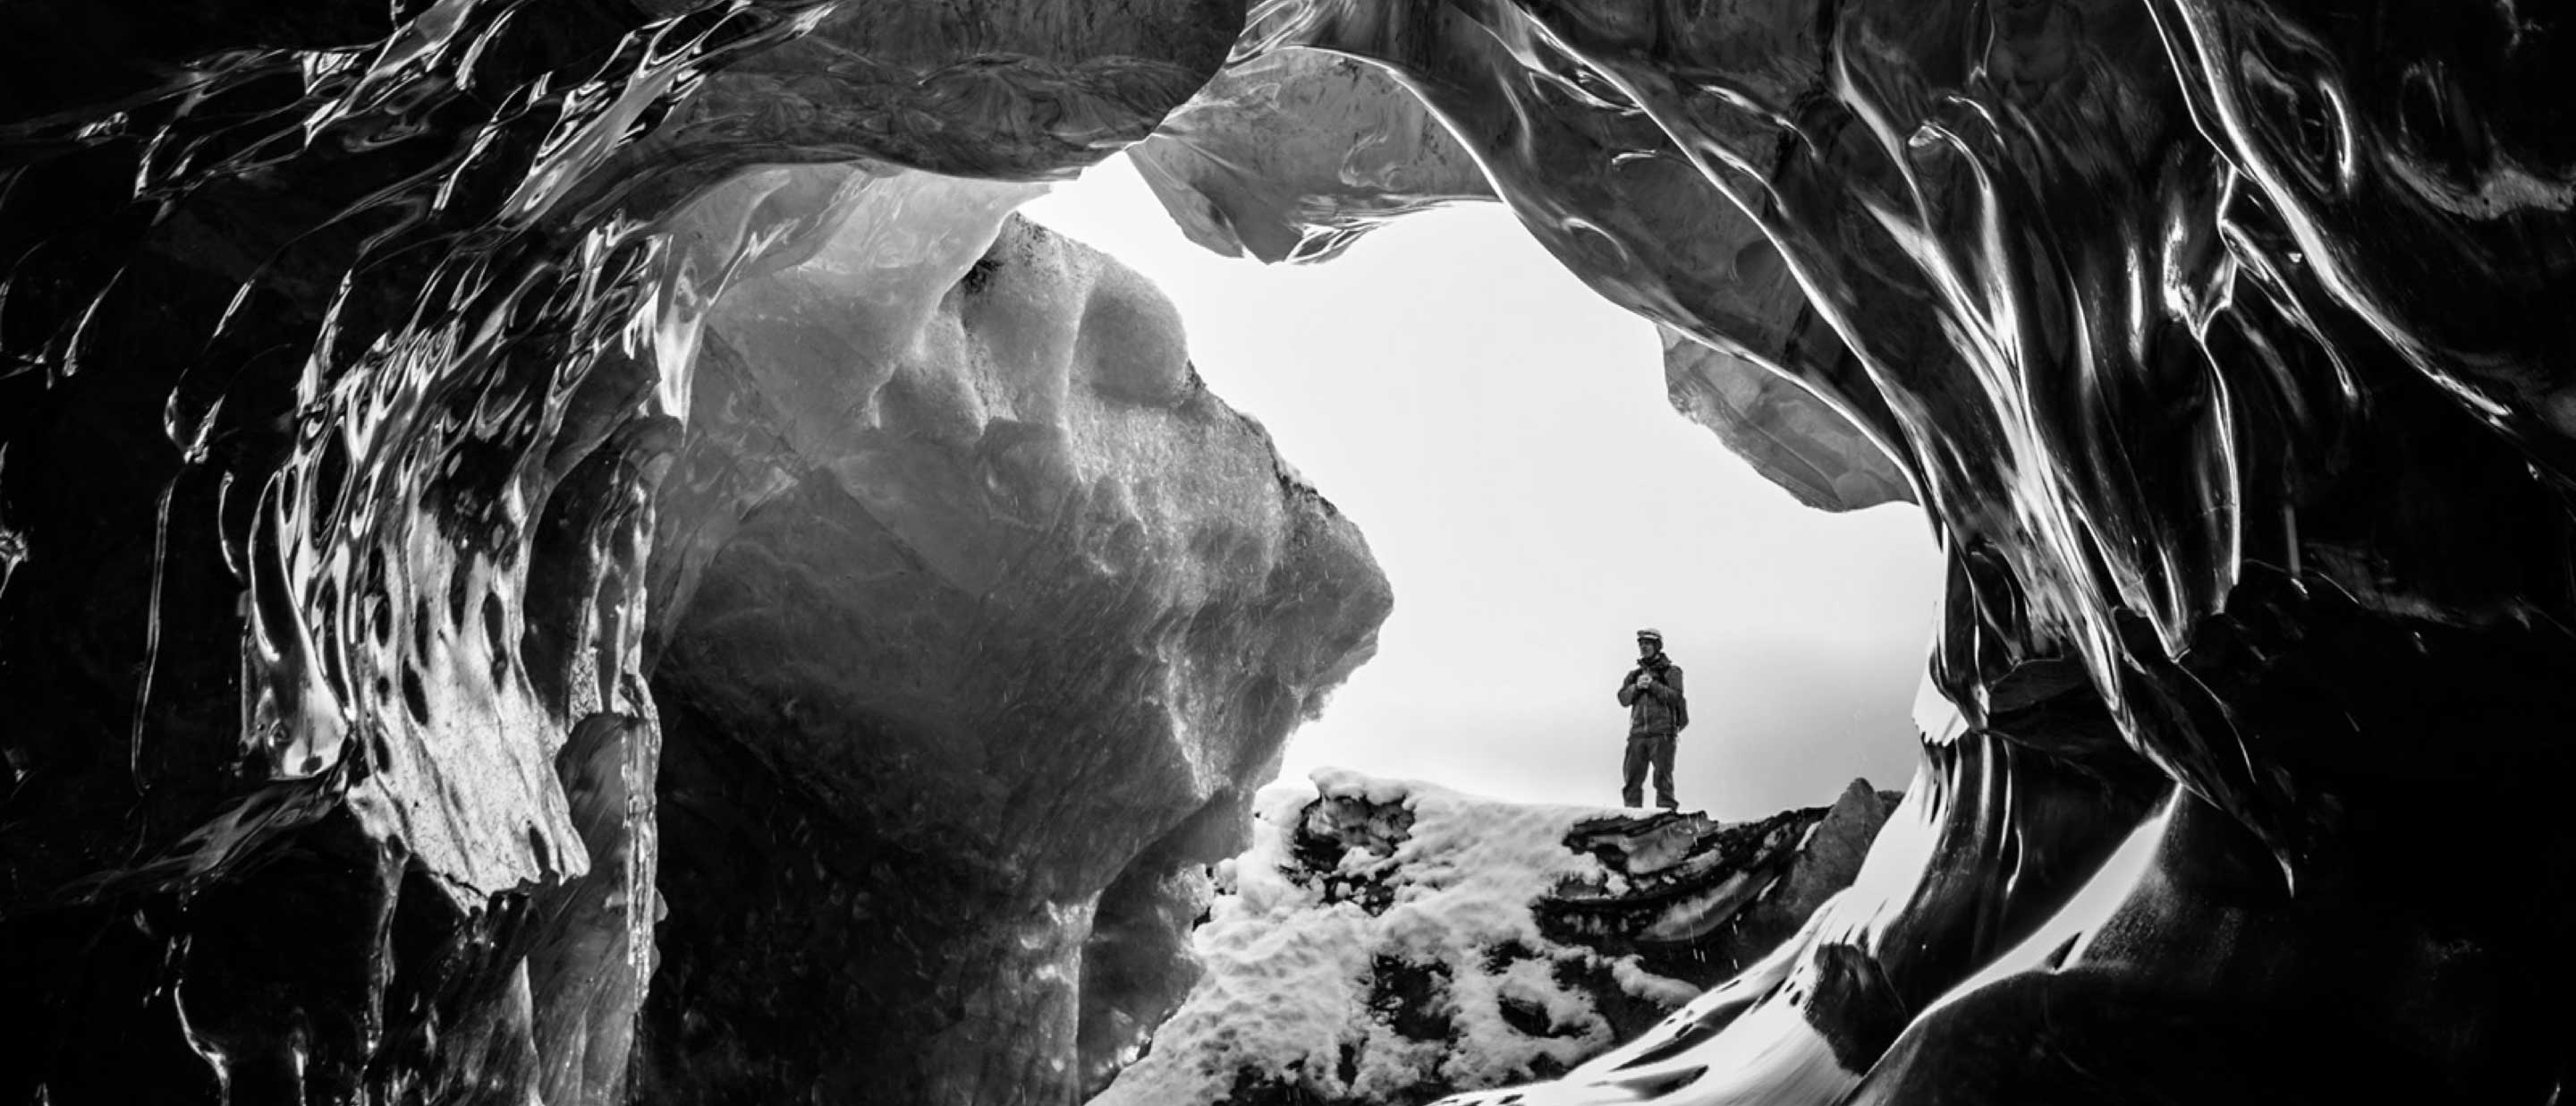 man in ice cave.